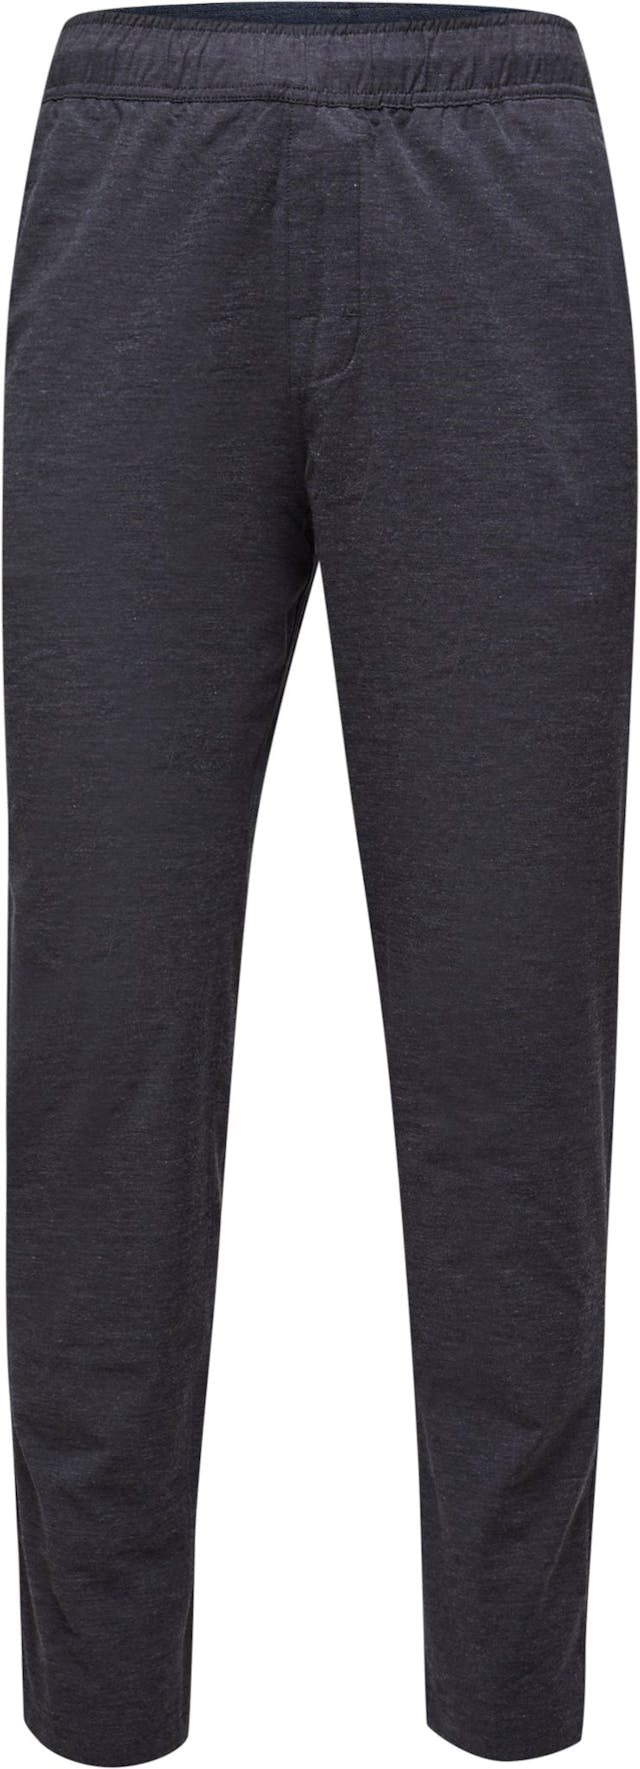 Product image for Slope Tapered Pant - Men's